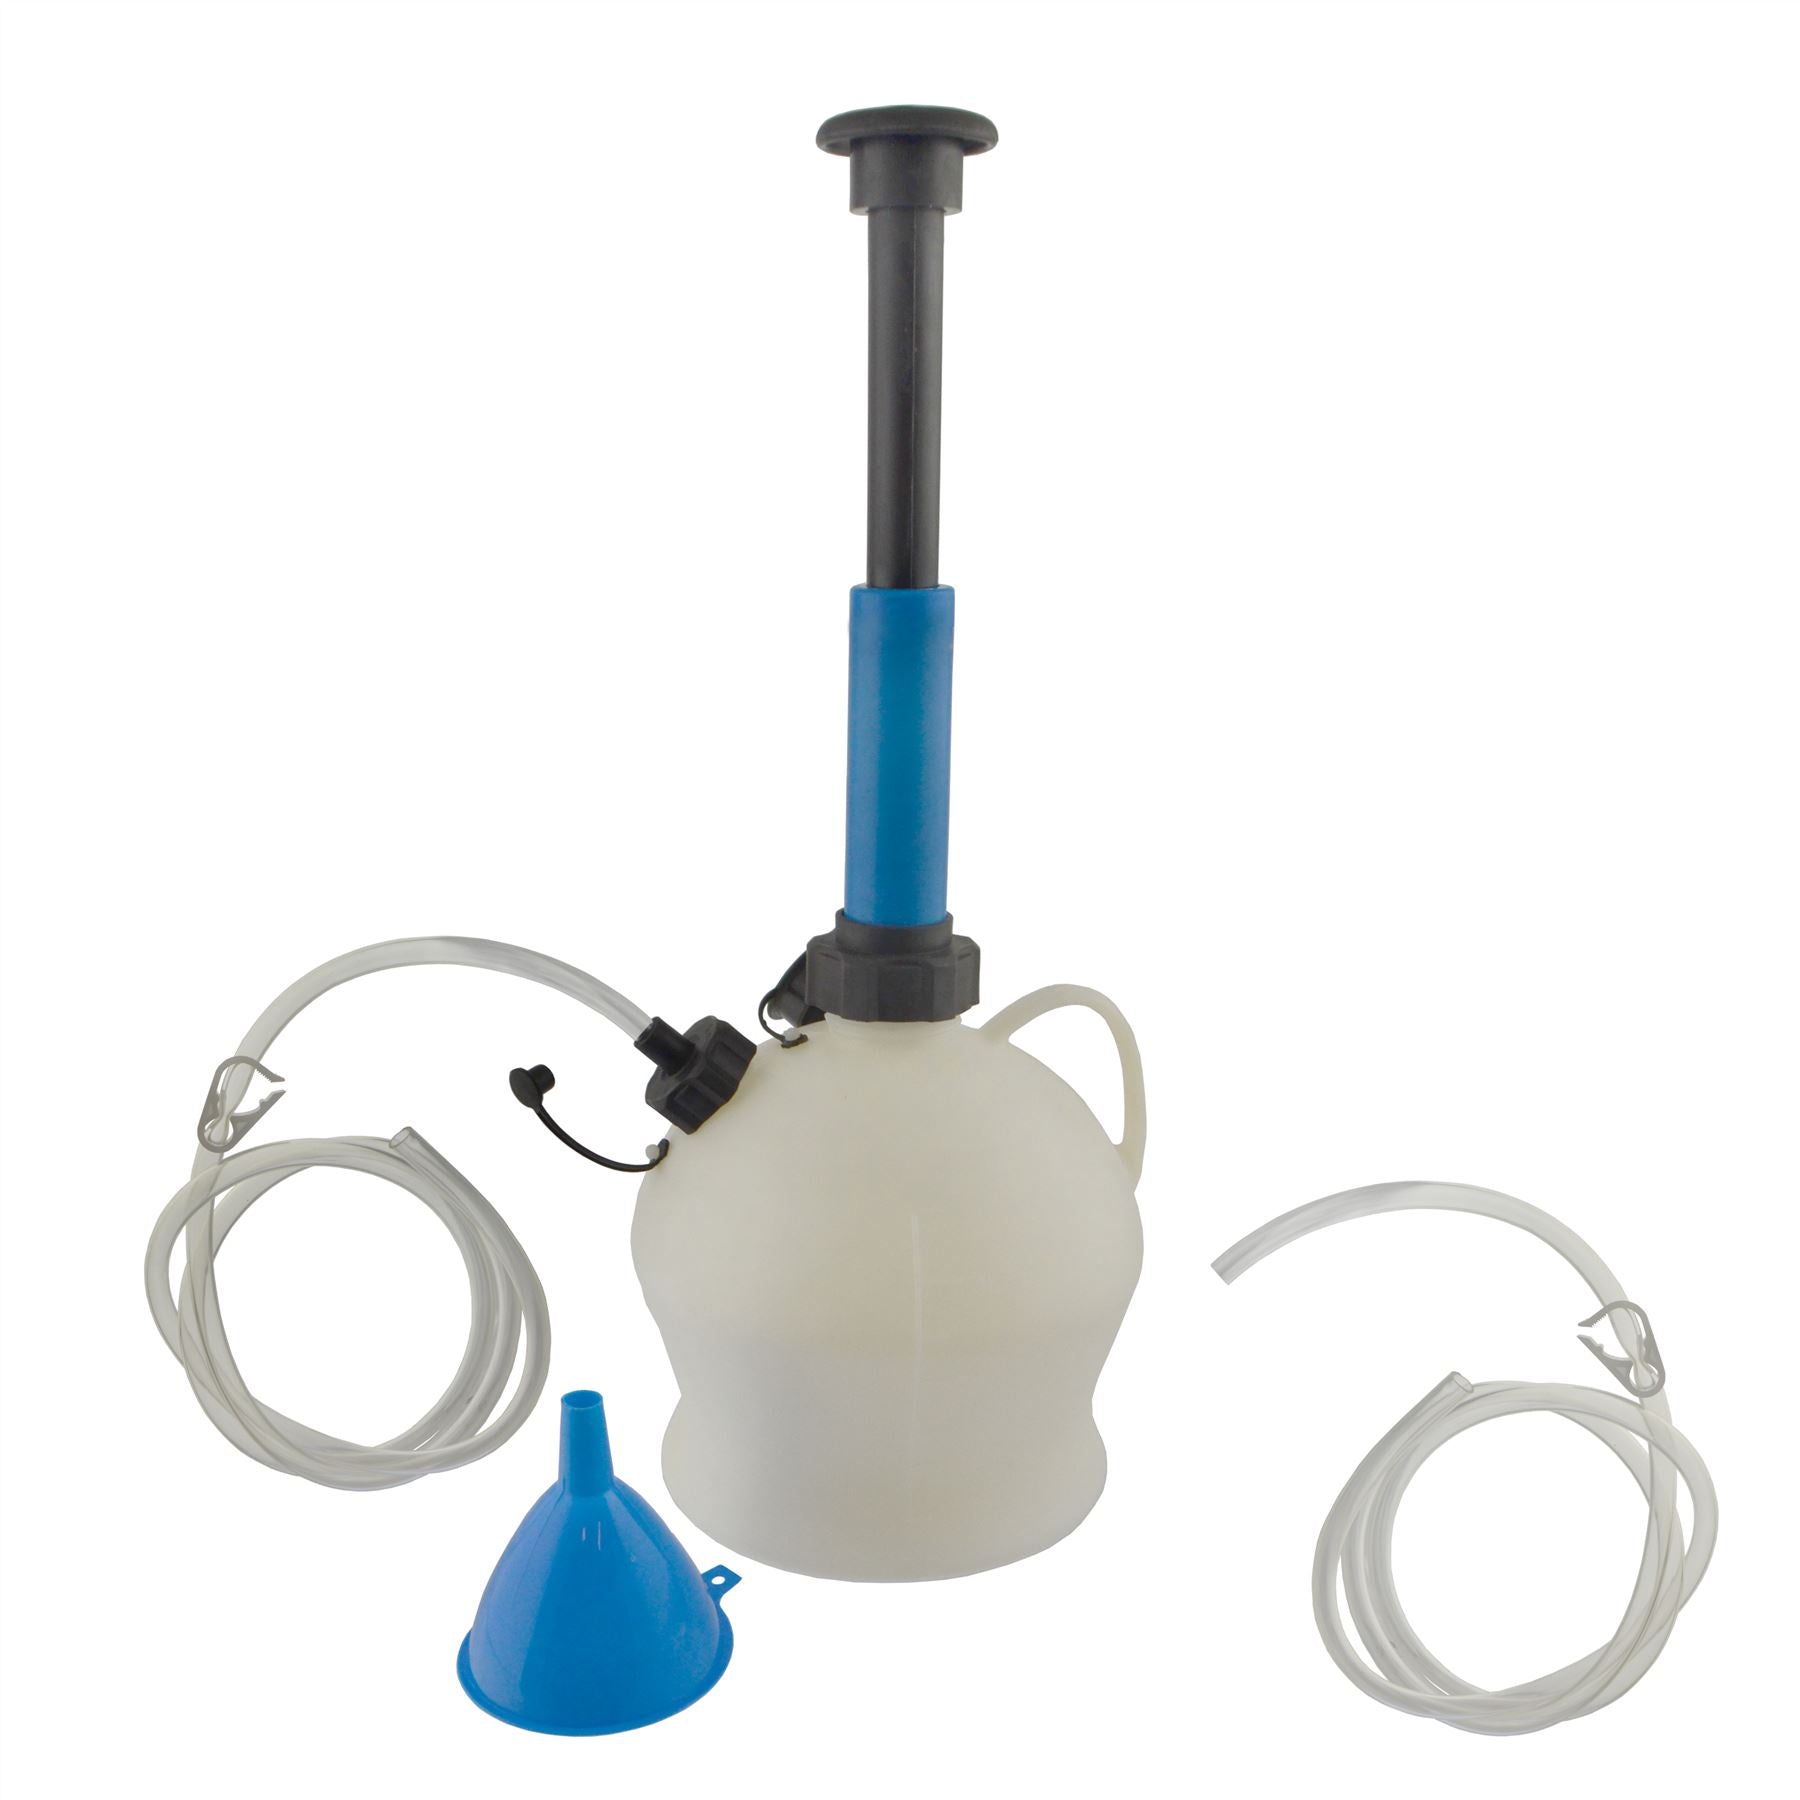 Oil and Fluid extraction siphon pump and container 4 Litre Sil103